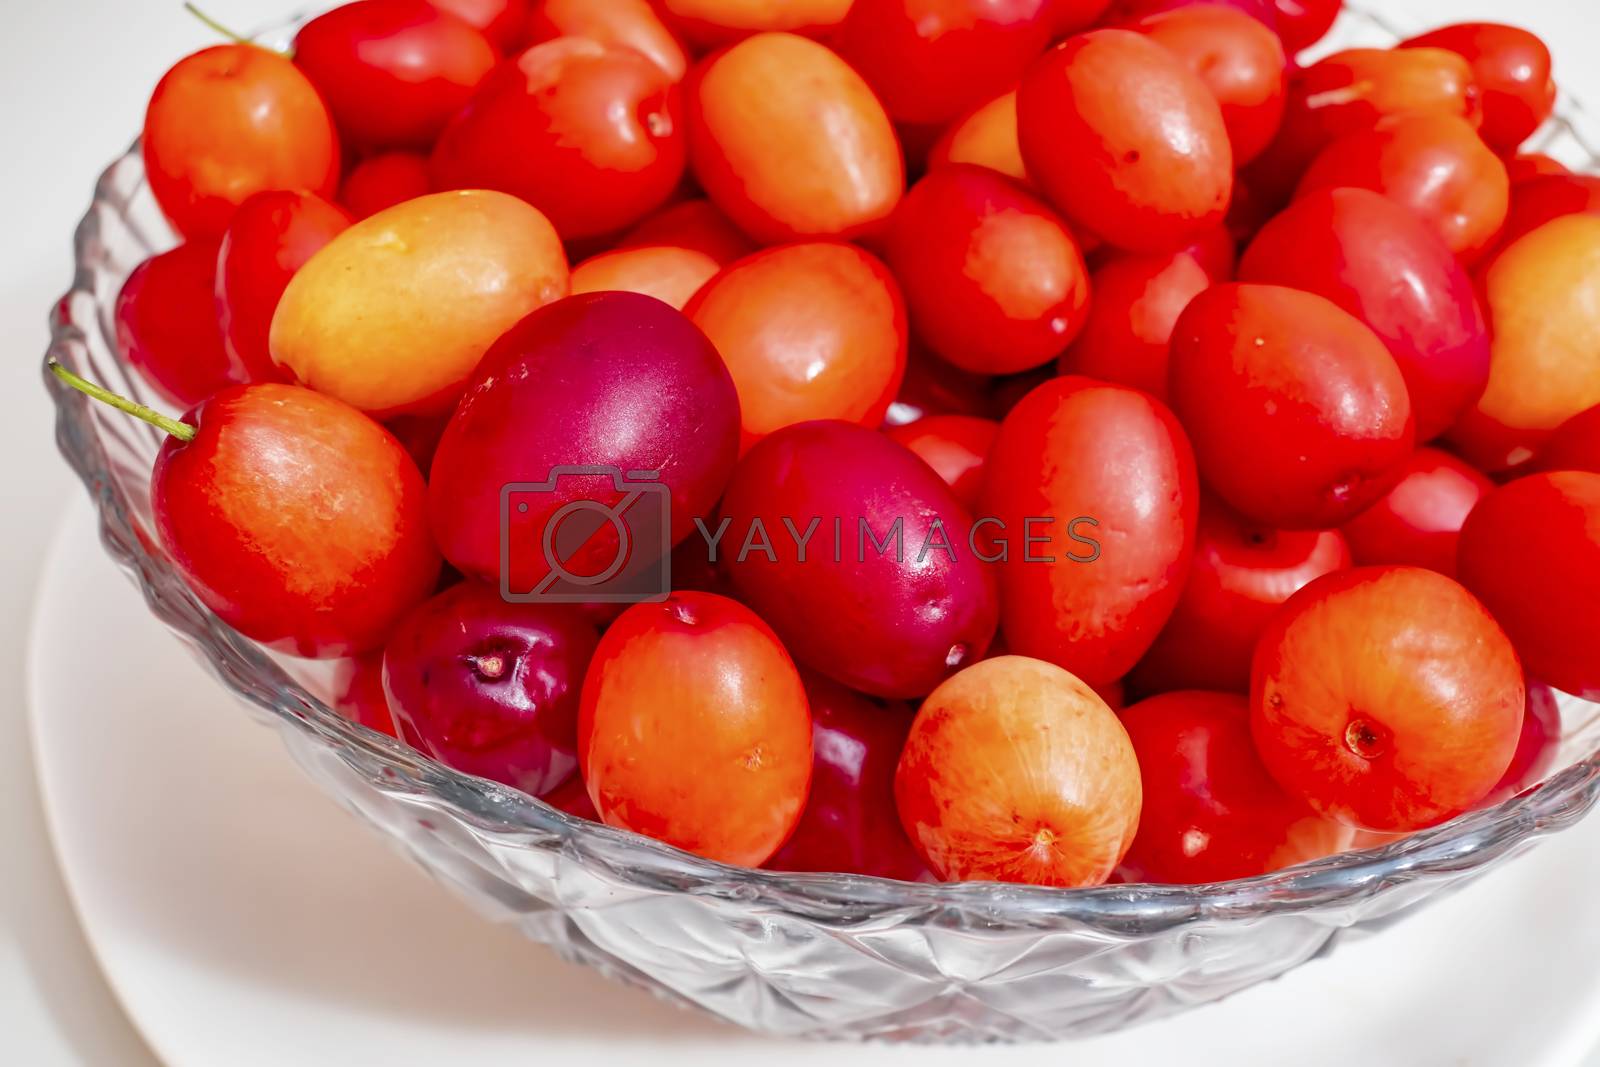 Royalty free image of cranberry fruits in decorative plate by yilmazsavaskandag